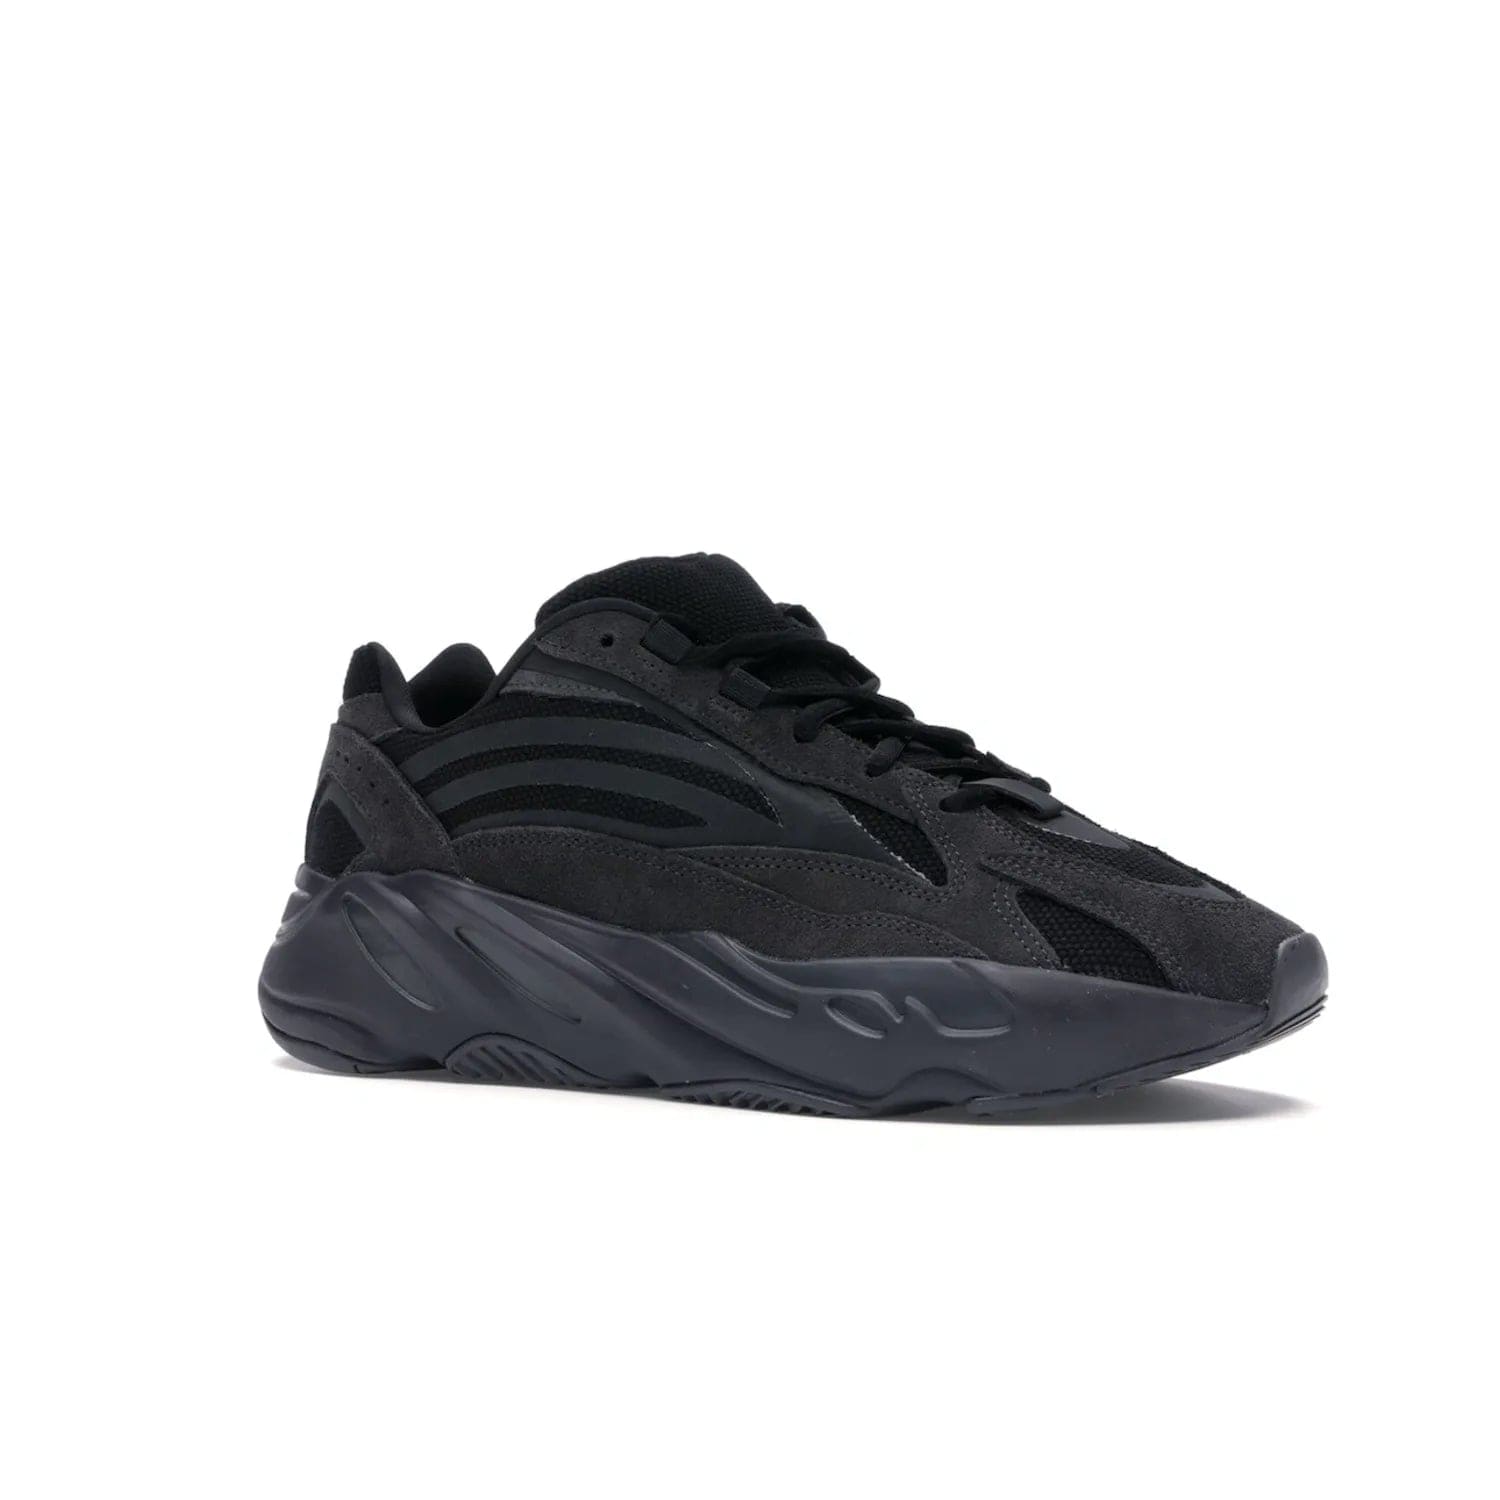 adidas Yeezy Boost 700 V2 Vanta - Image 4 - Only at www.BallersClubKickz.com - Introducing the adidas Yeezy Boost 700 V2 Vanta - a sleek and stylish all-black design featuring a combination of mesh, leather, and suede construction with signature Boost cushioning in the sole. The ultimate in comfort and support.